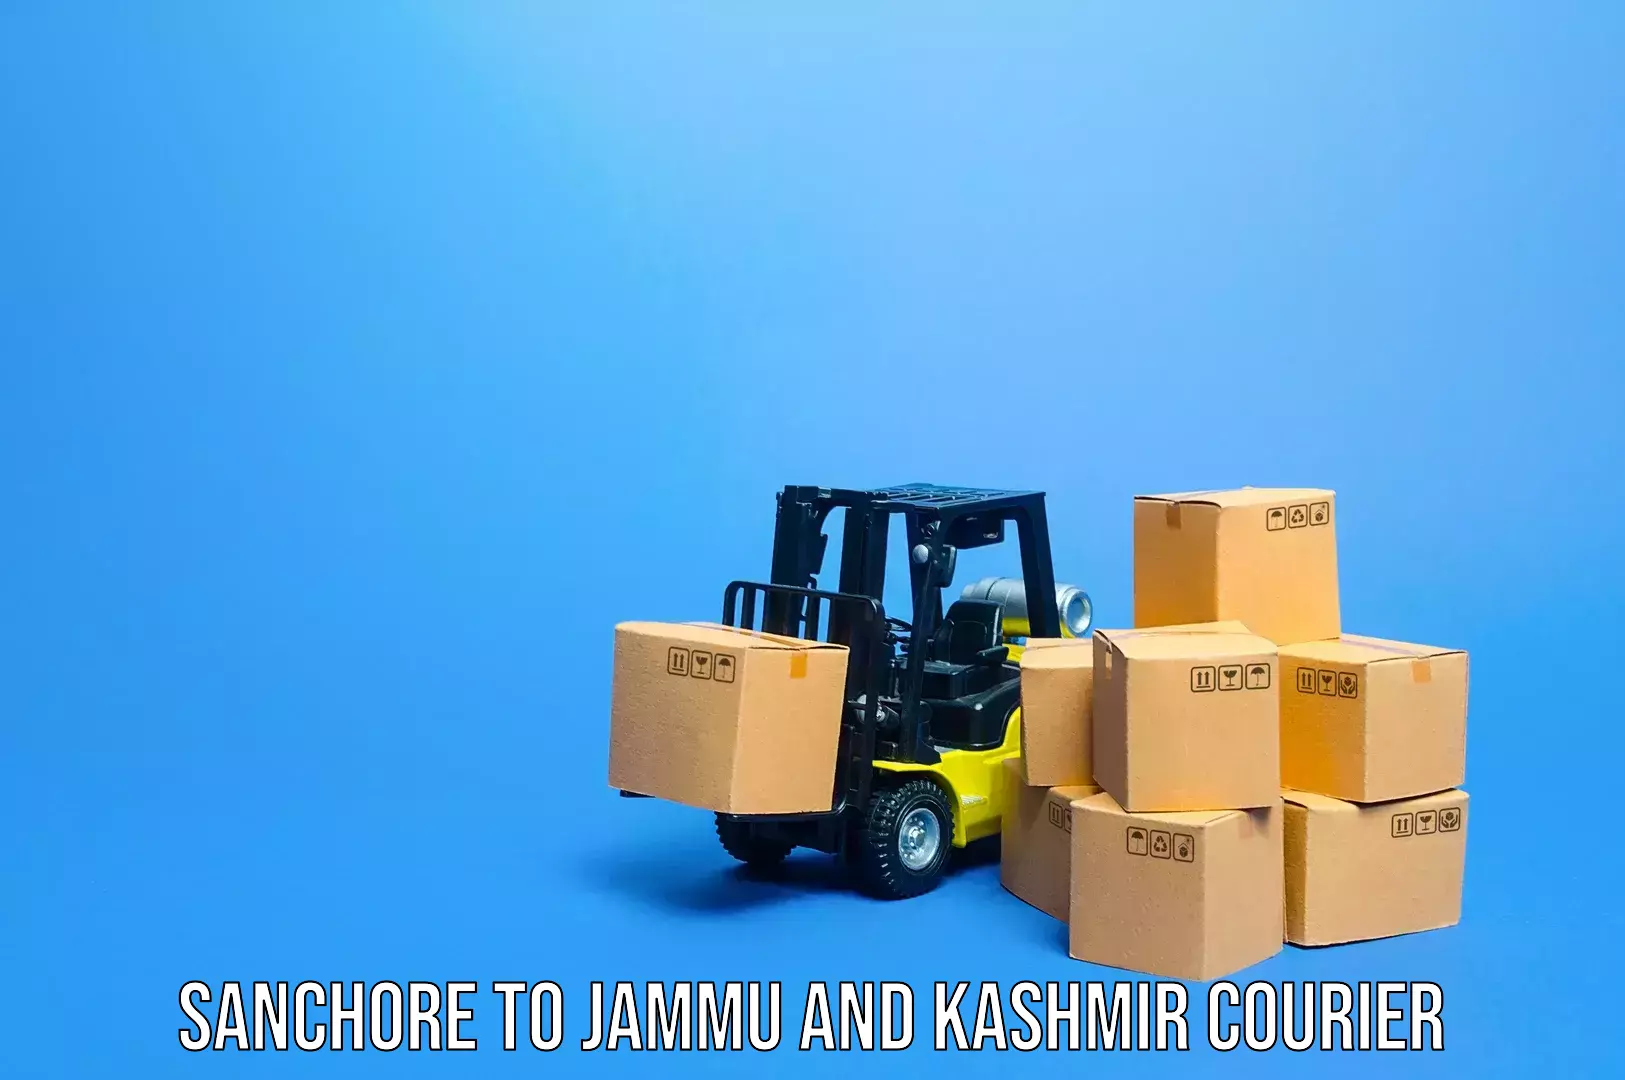 Luggage shipping specialists Sanchore to Jammu and Kashmir